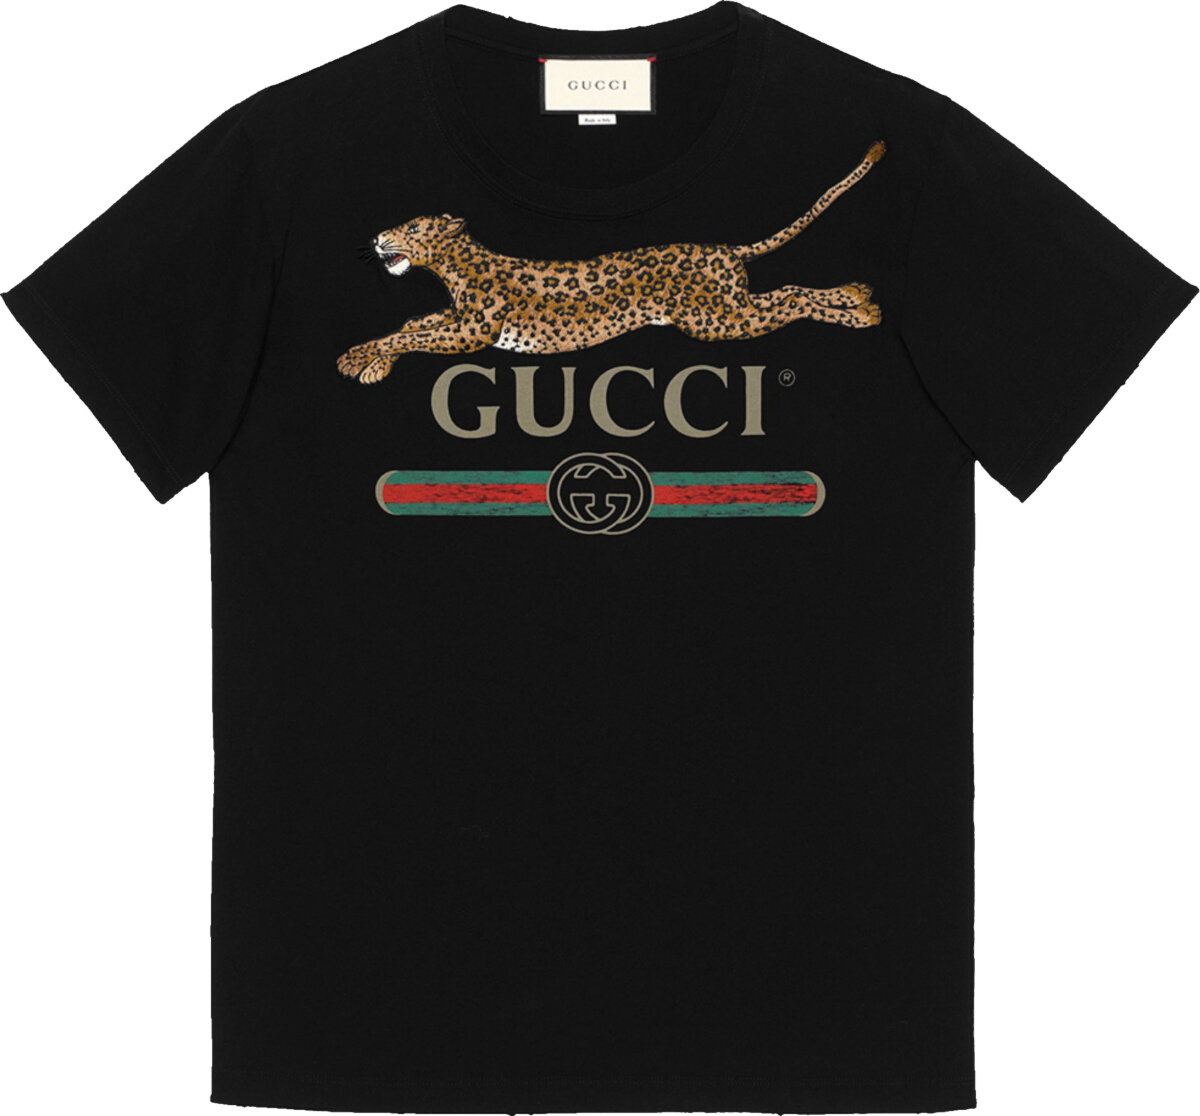 Gucci Logo Animal : All of the gucci logo pieces our team would like to ...